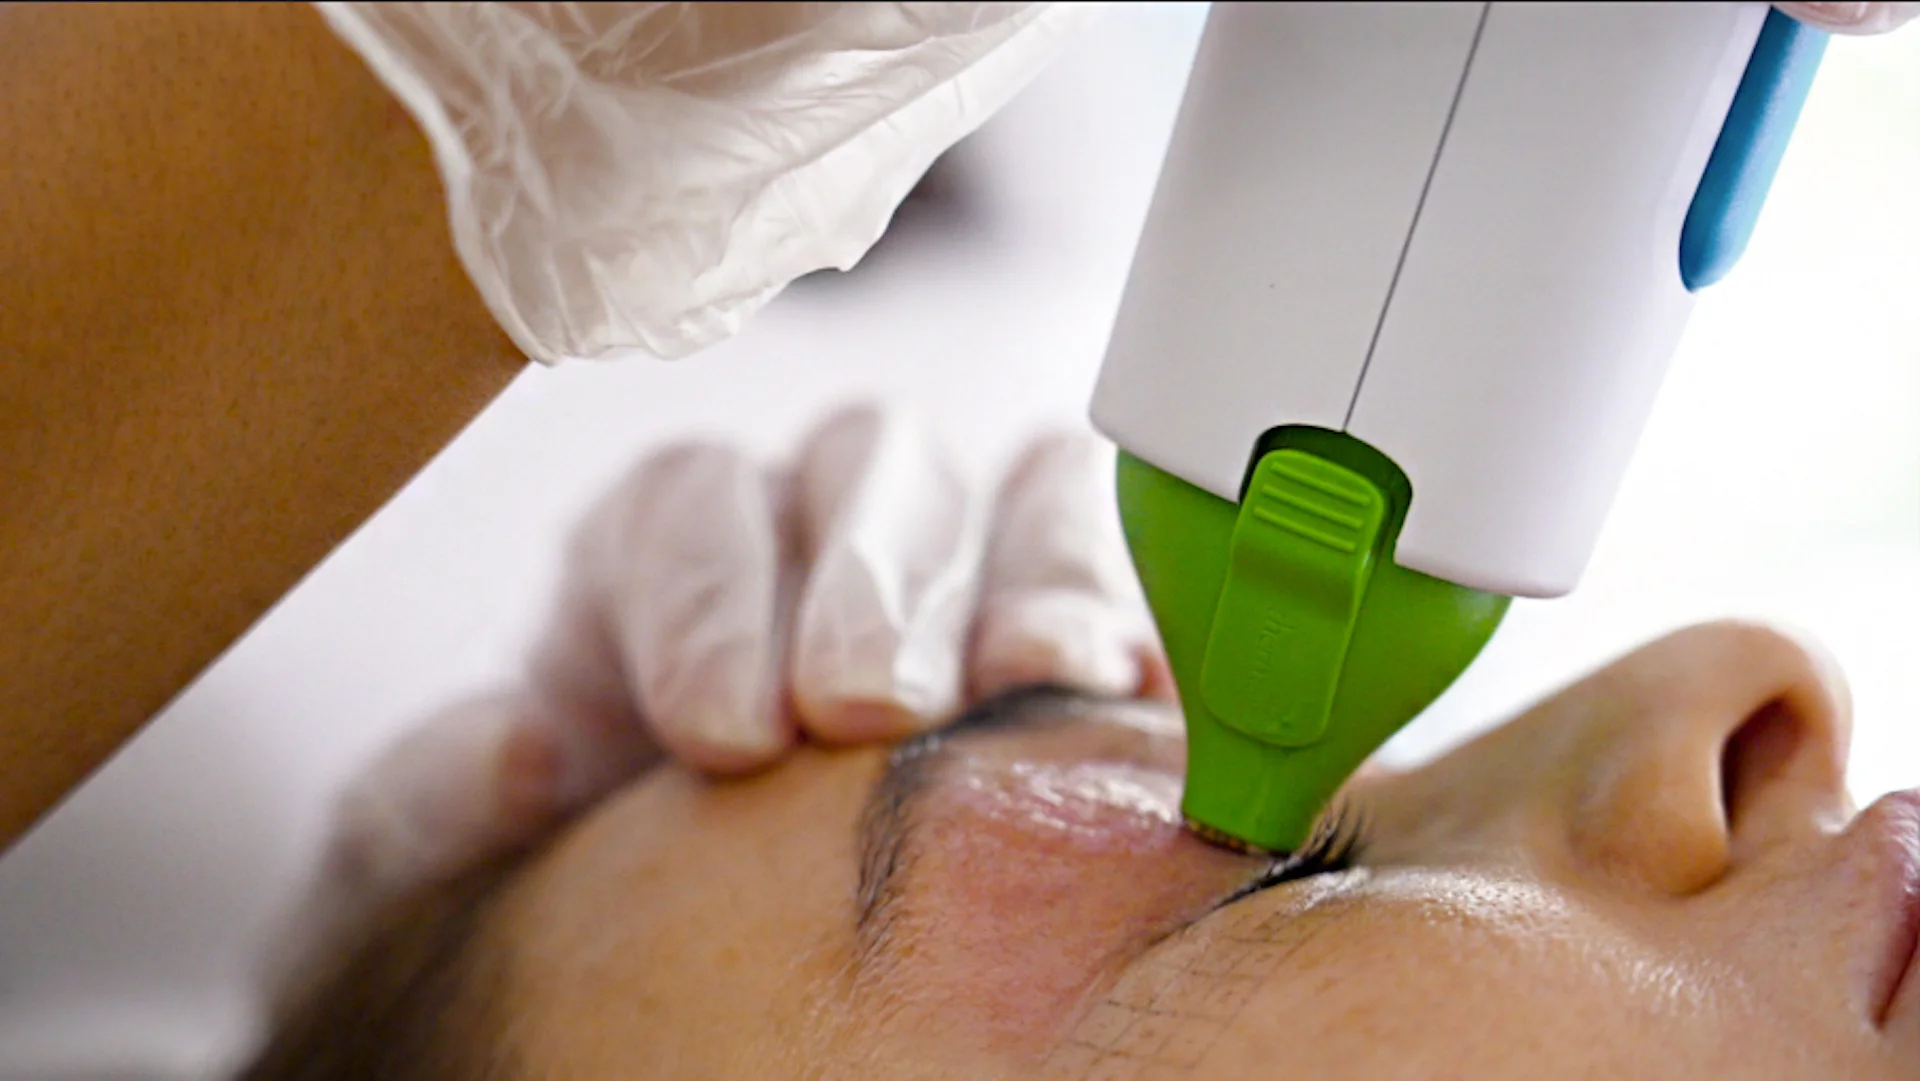 Thermage for eyes for non-surgical eye area rejuvenation - restore the vitality and freshness around your eyes and eyelids with this advanced laser treatment.